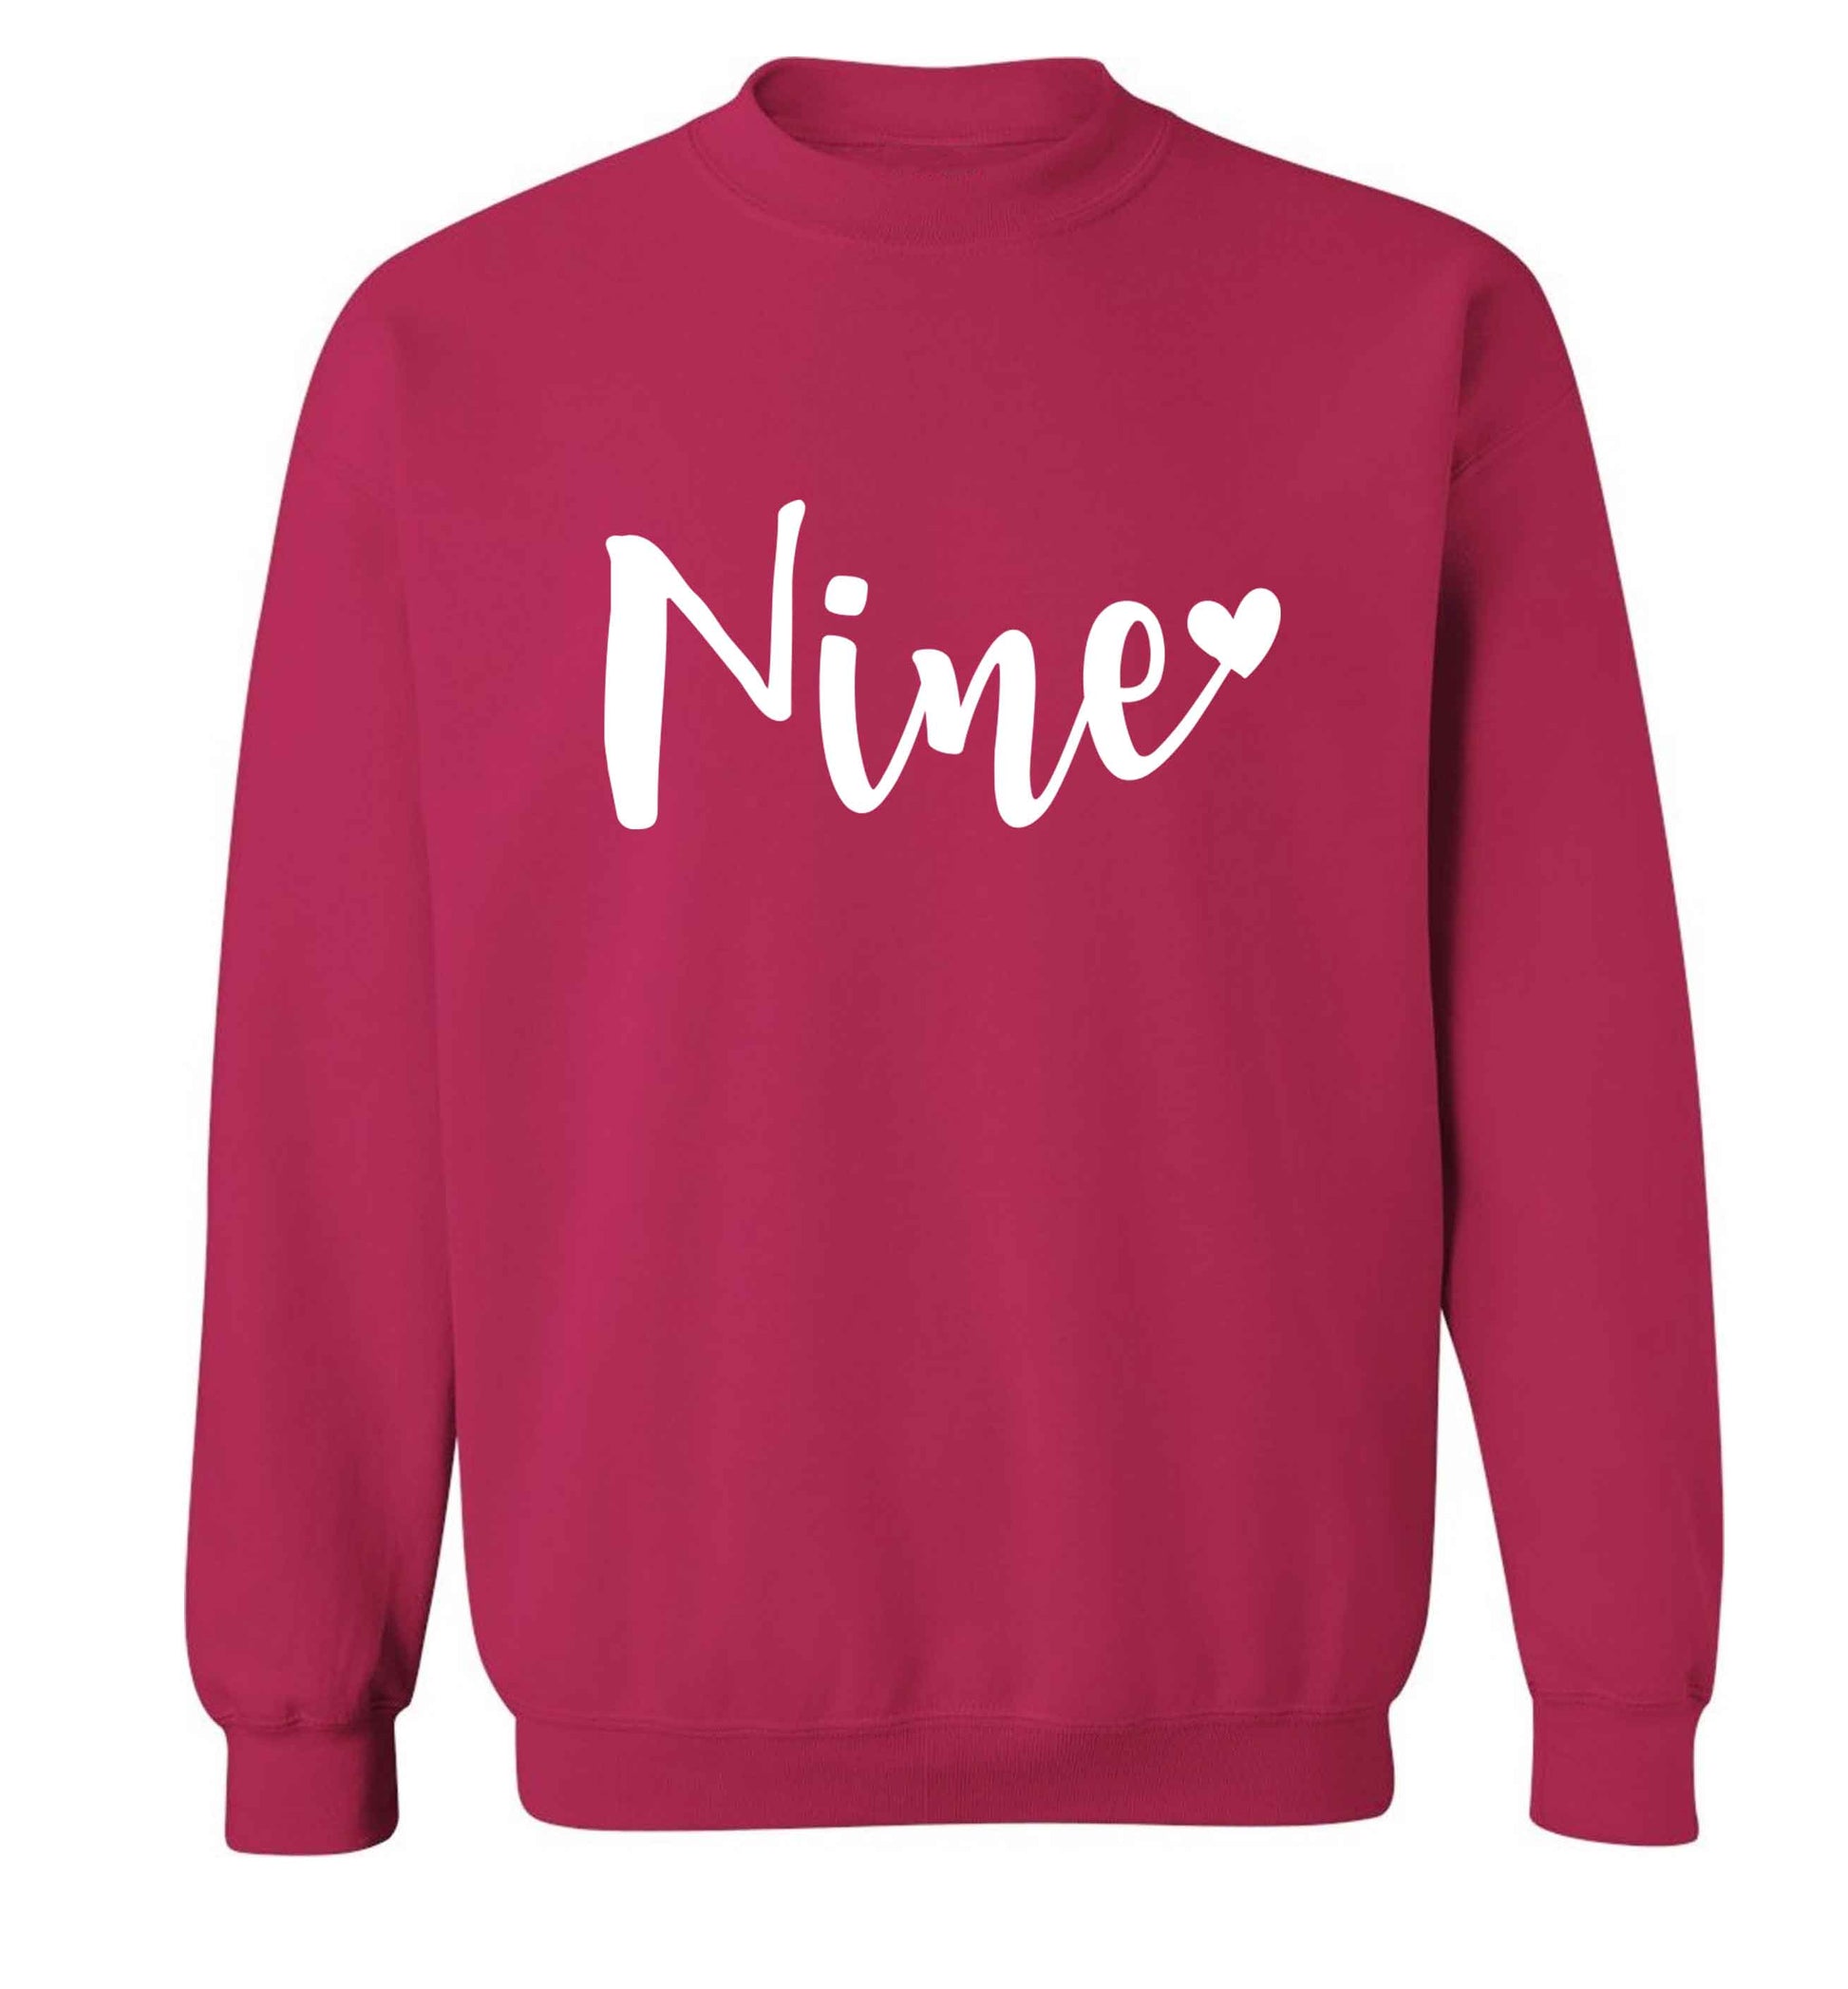 Nine and heart adult's unisex pink sweater 2XL